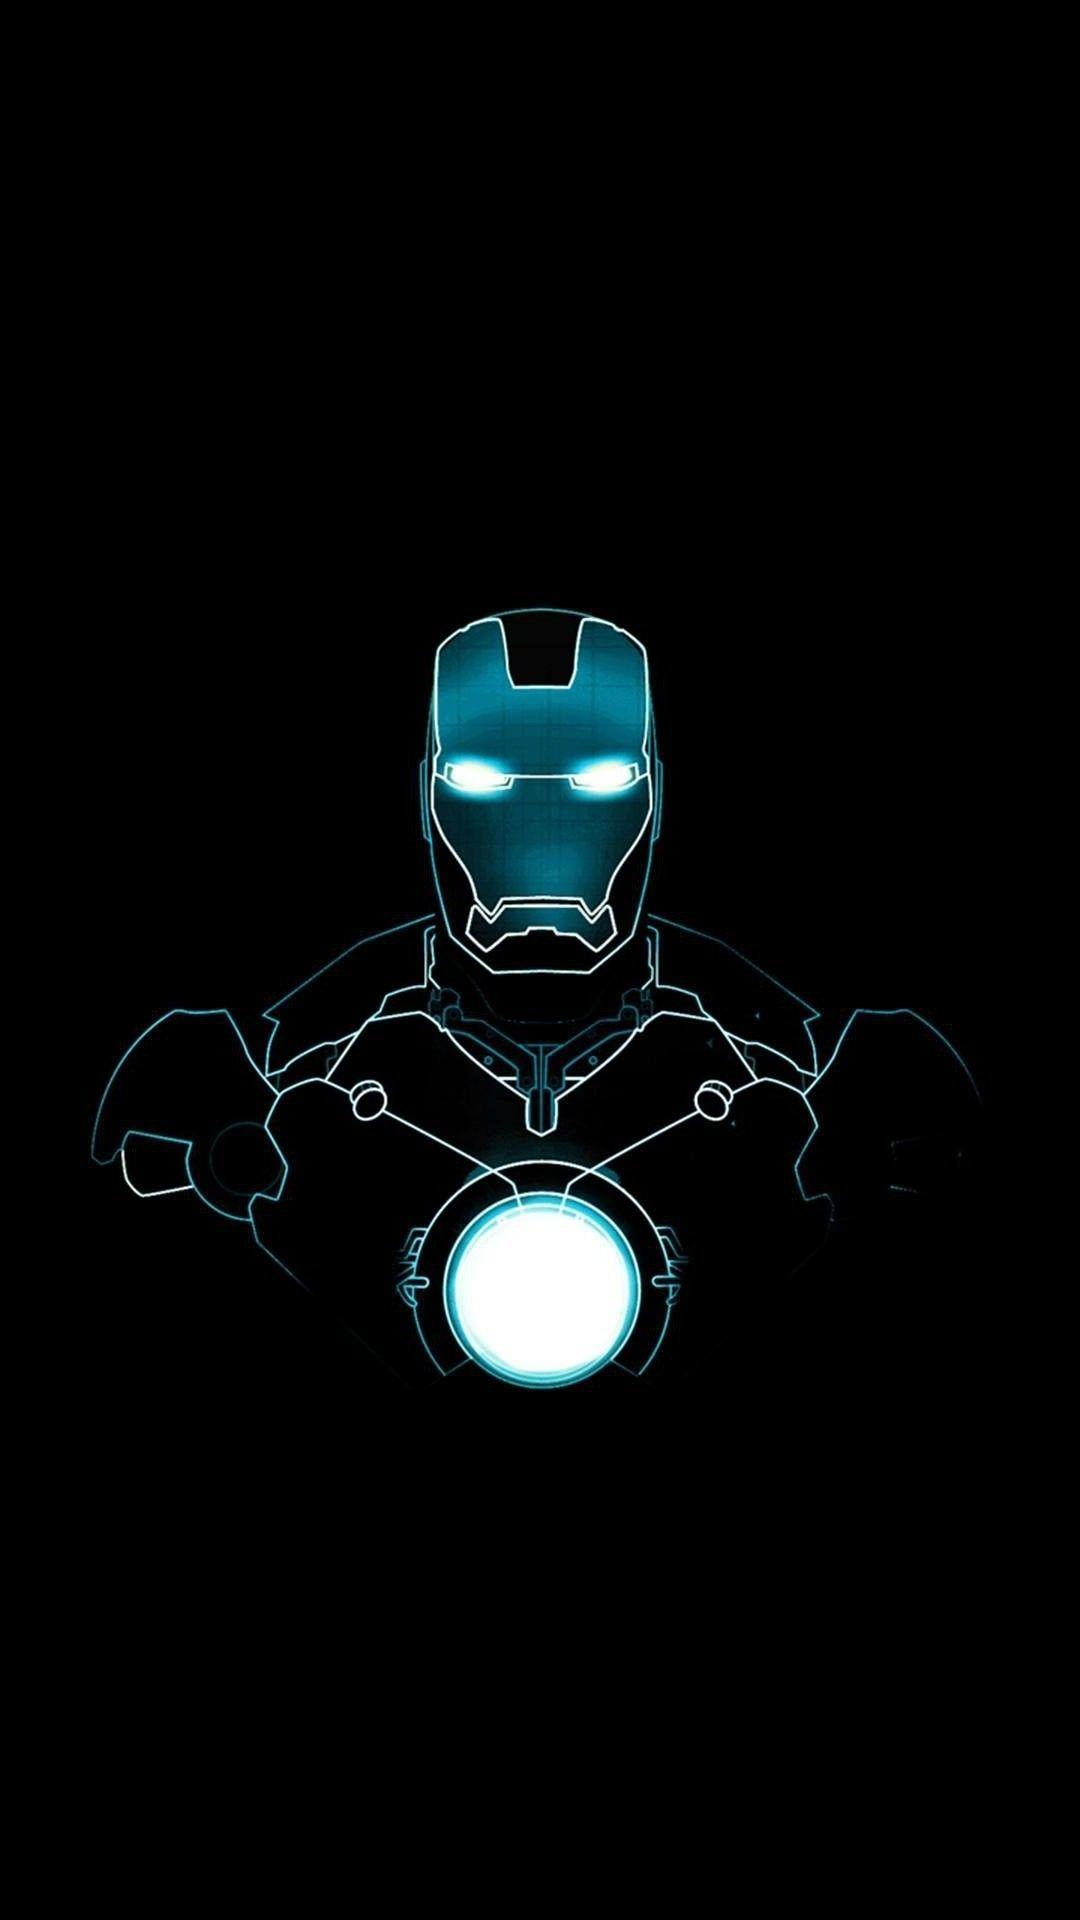 Jarvis Iphone Wallpapers Top Free Jarvis Iphone Backgrounds Wallpaperaccess